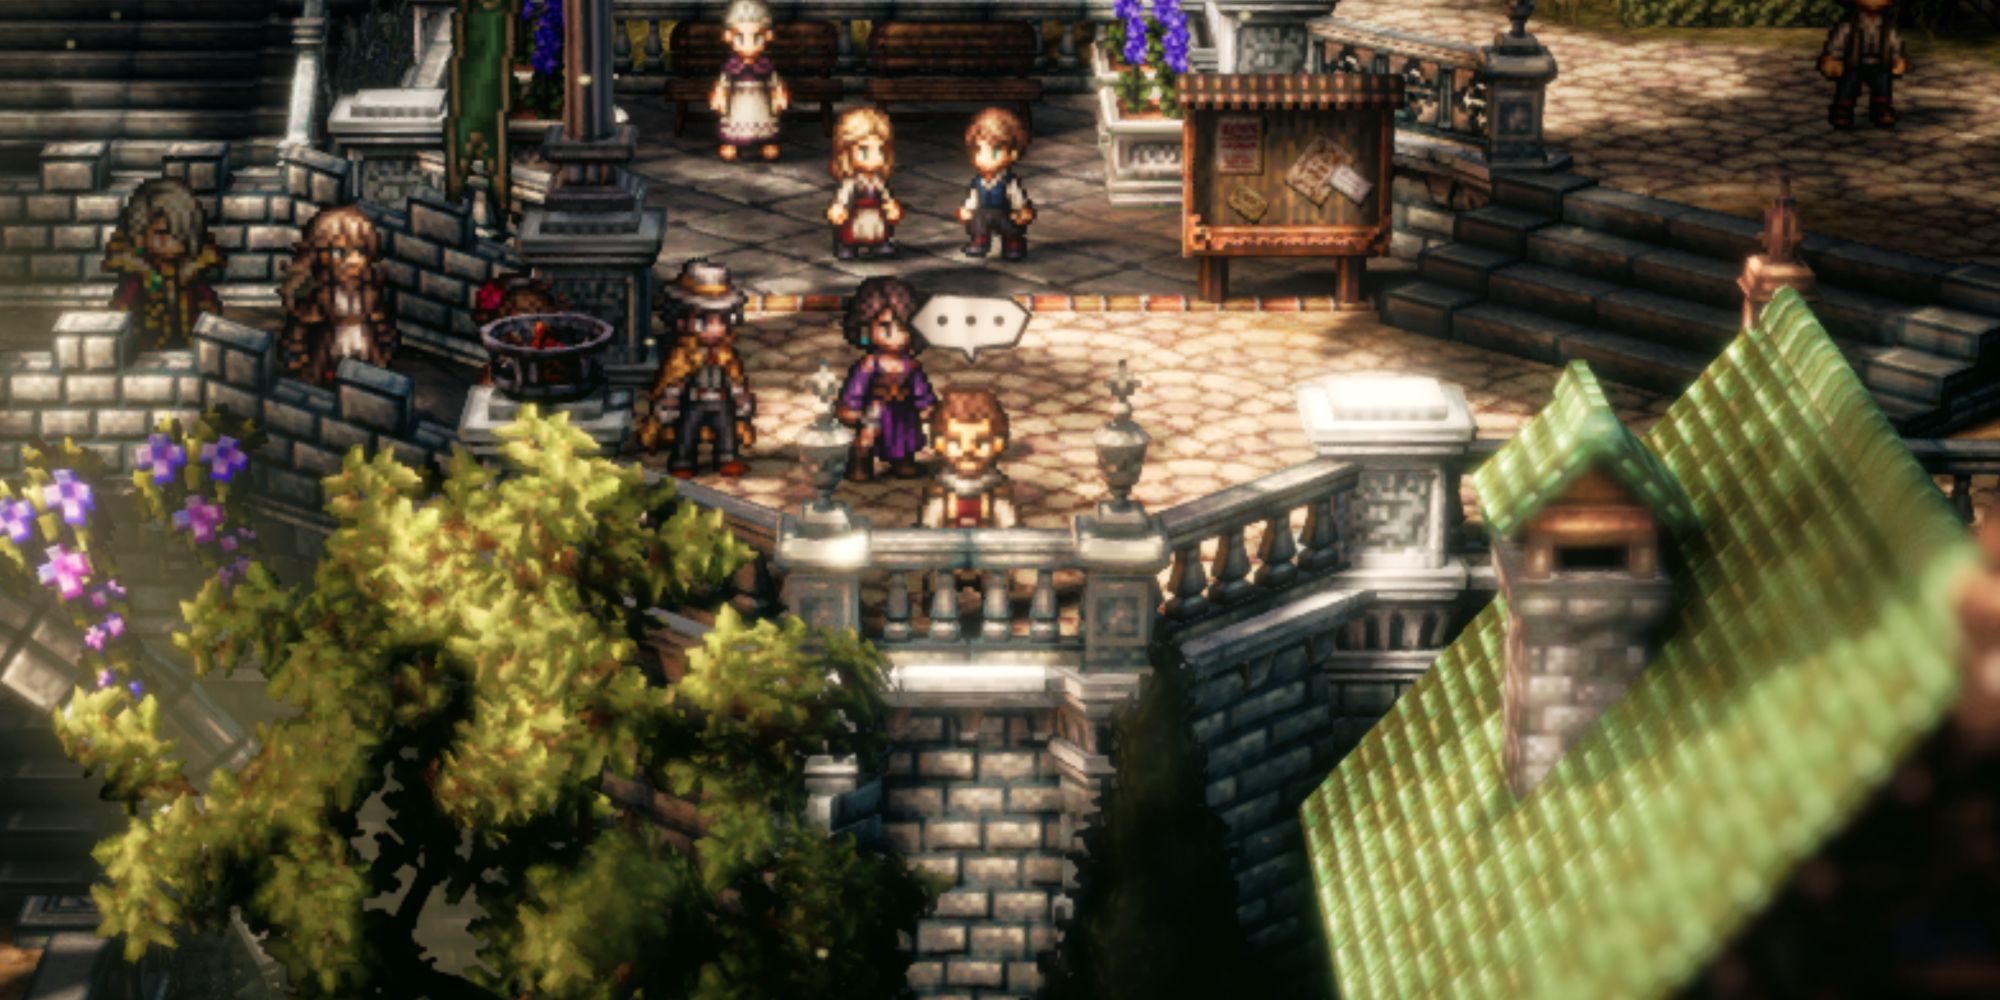 Octopath Traveler 2 Timberain Soldier in the Day